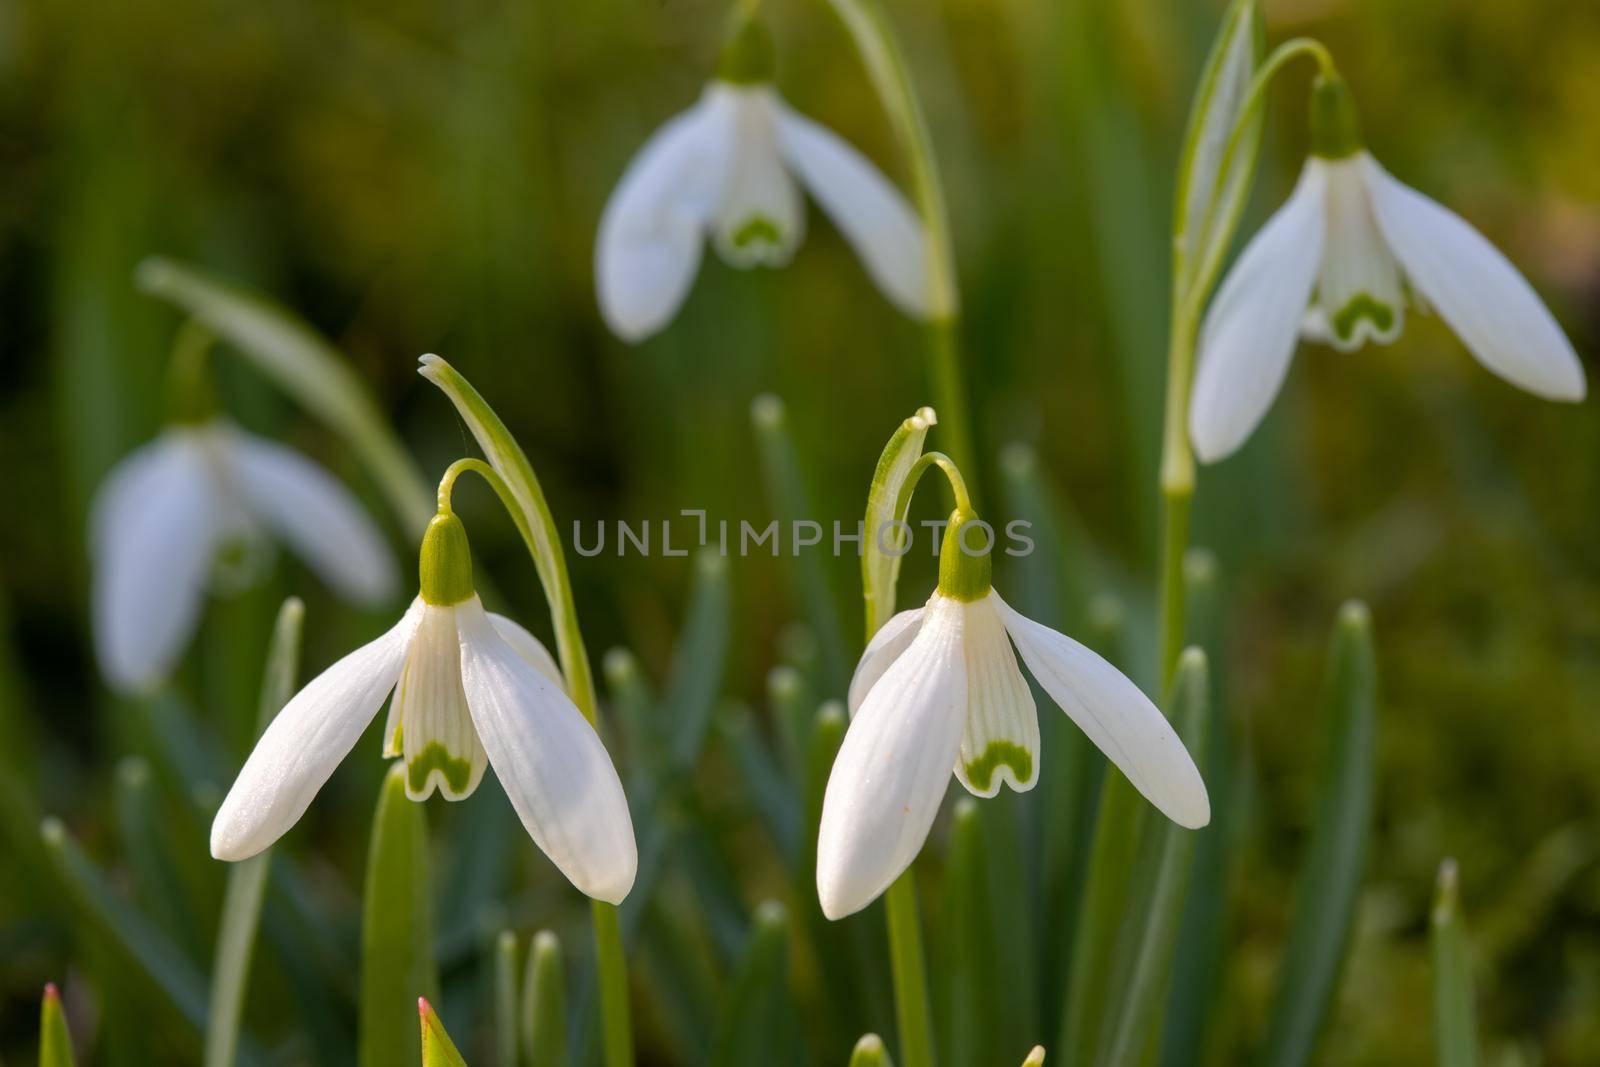 Close-up of several snowdrops in a meadow in spring